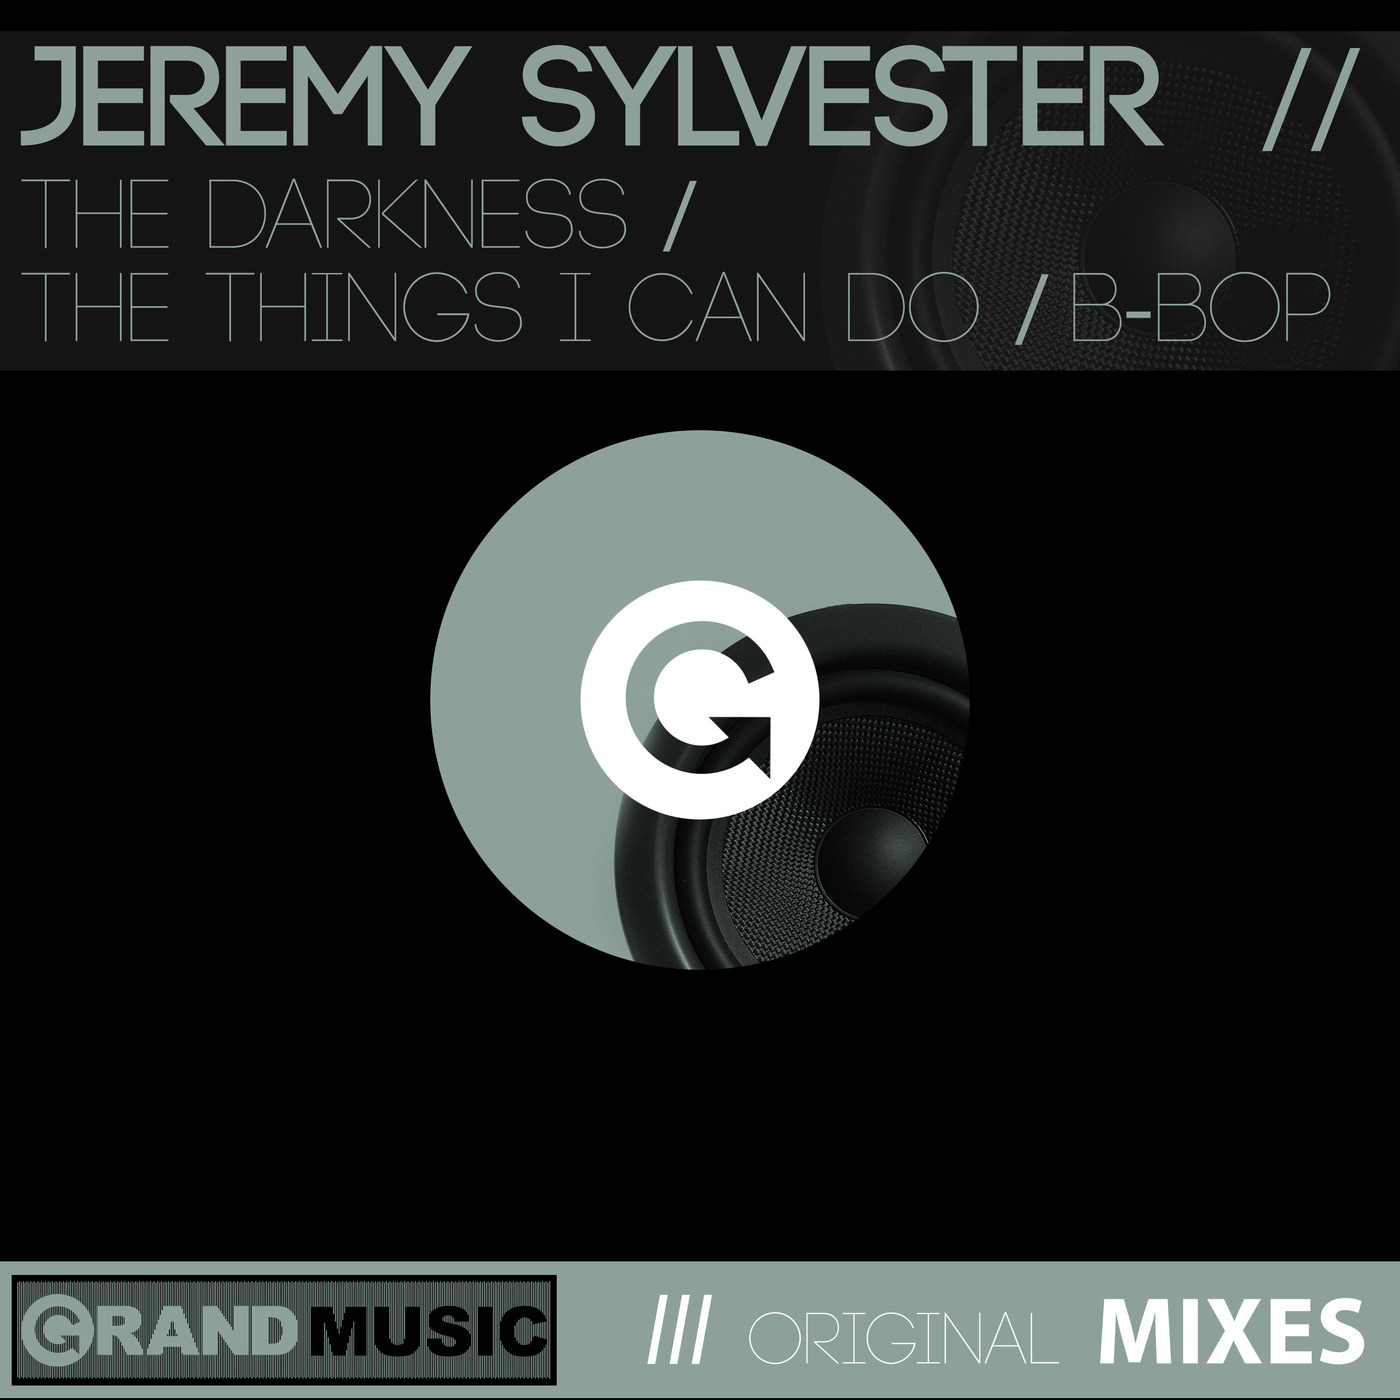 Jeremy Sylvester - The Darkness / The Things I Can Do / B-Bop / GRAND Music